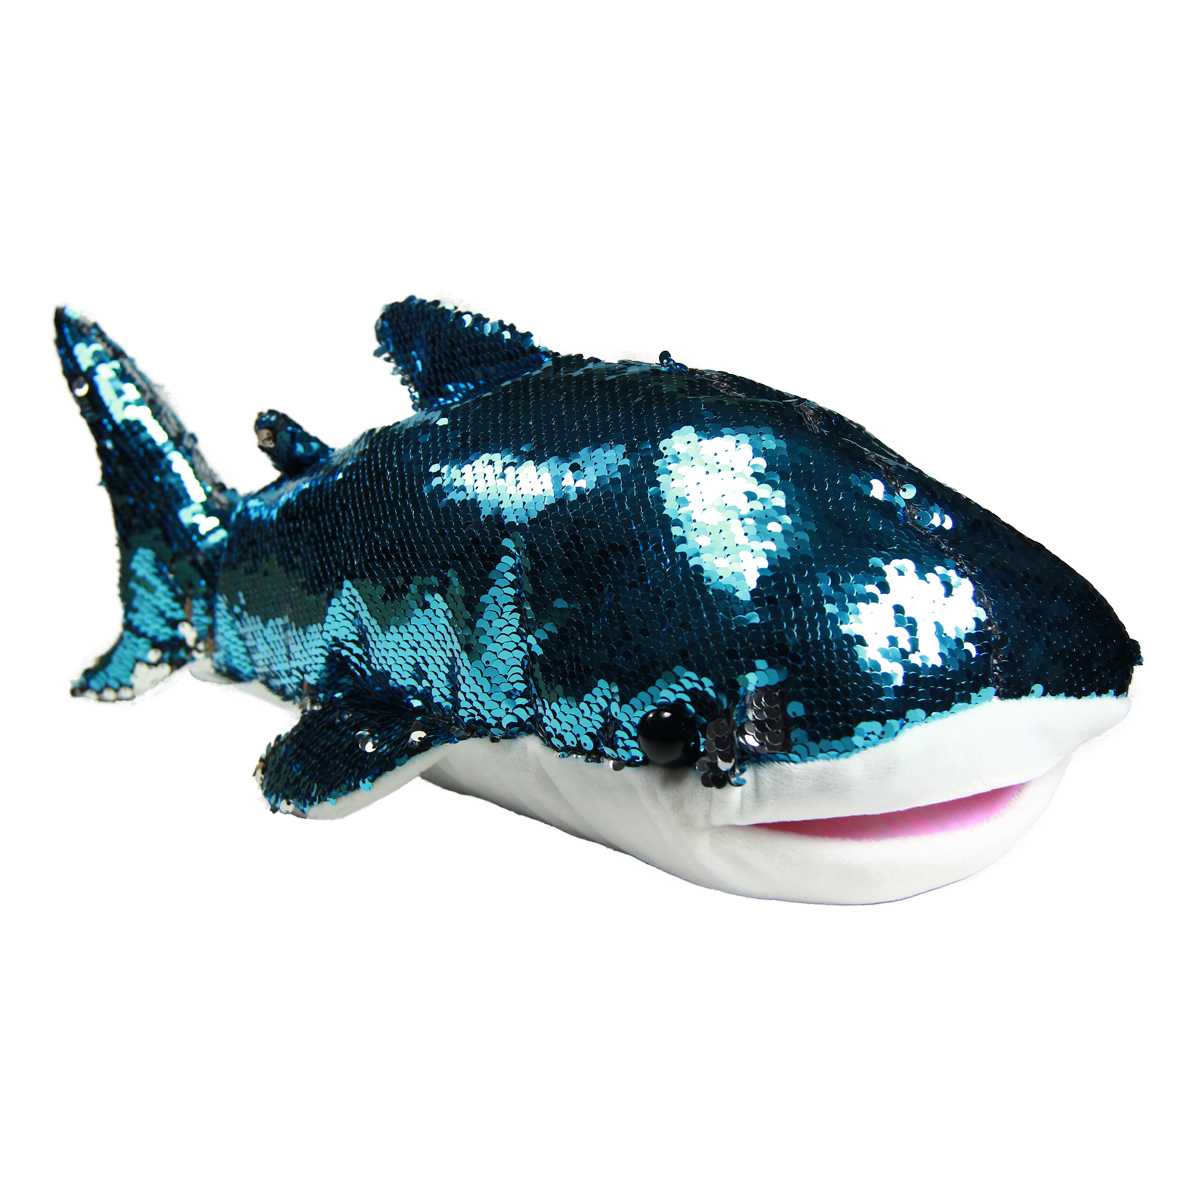 Shark Plush Doll, Flip Sequin, Big Size, Blue Silver 17 Inches